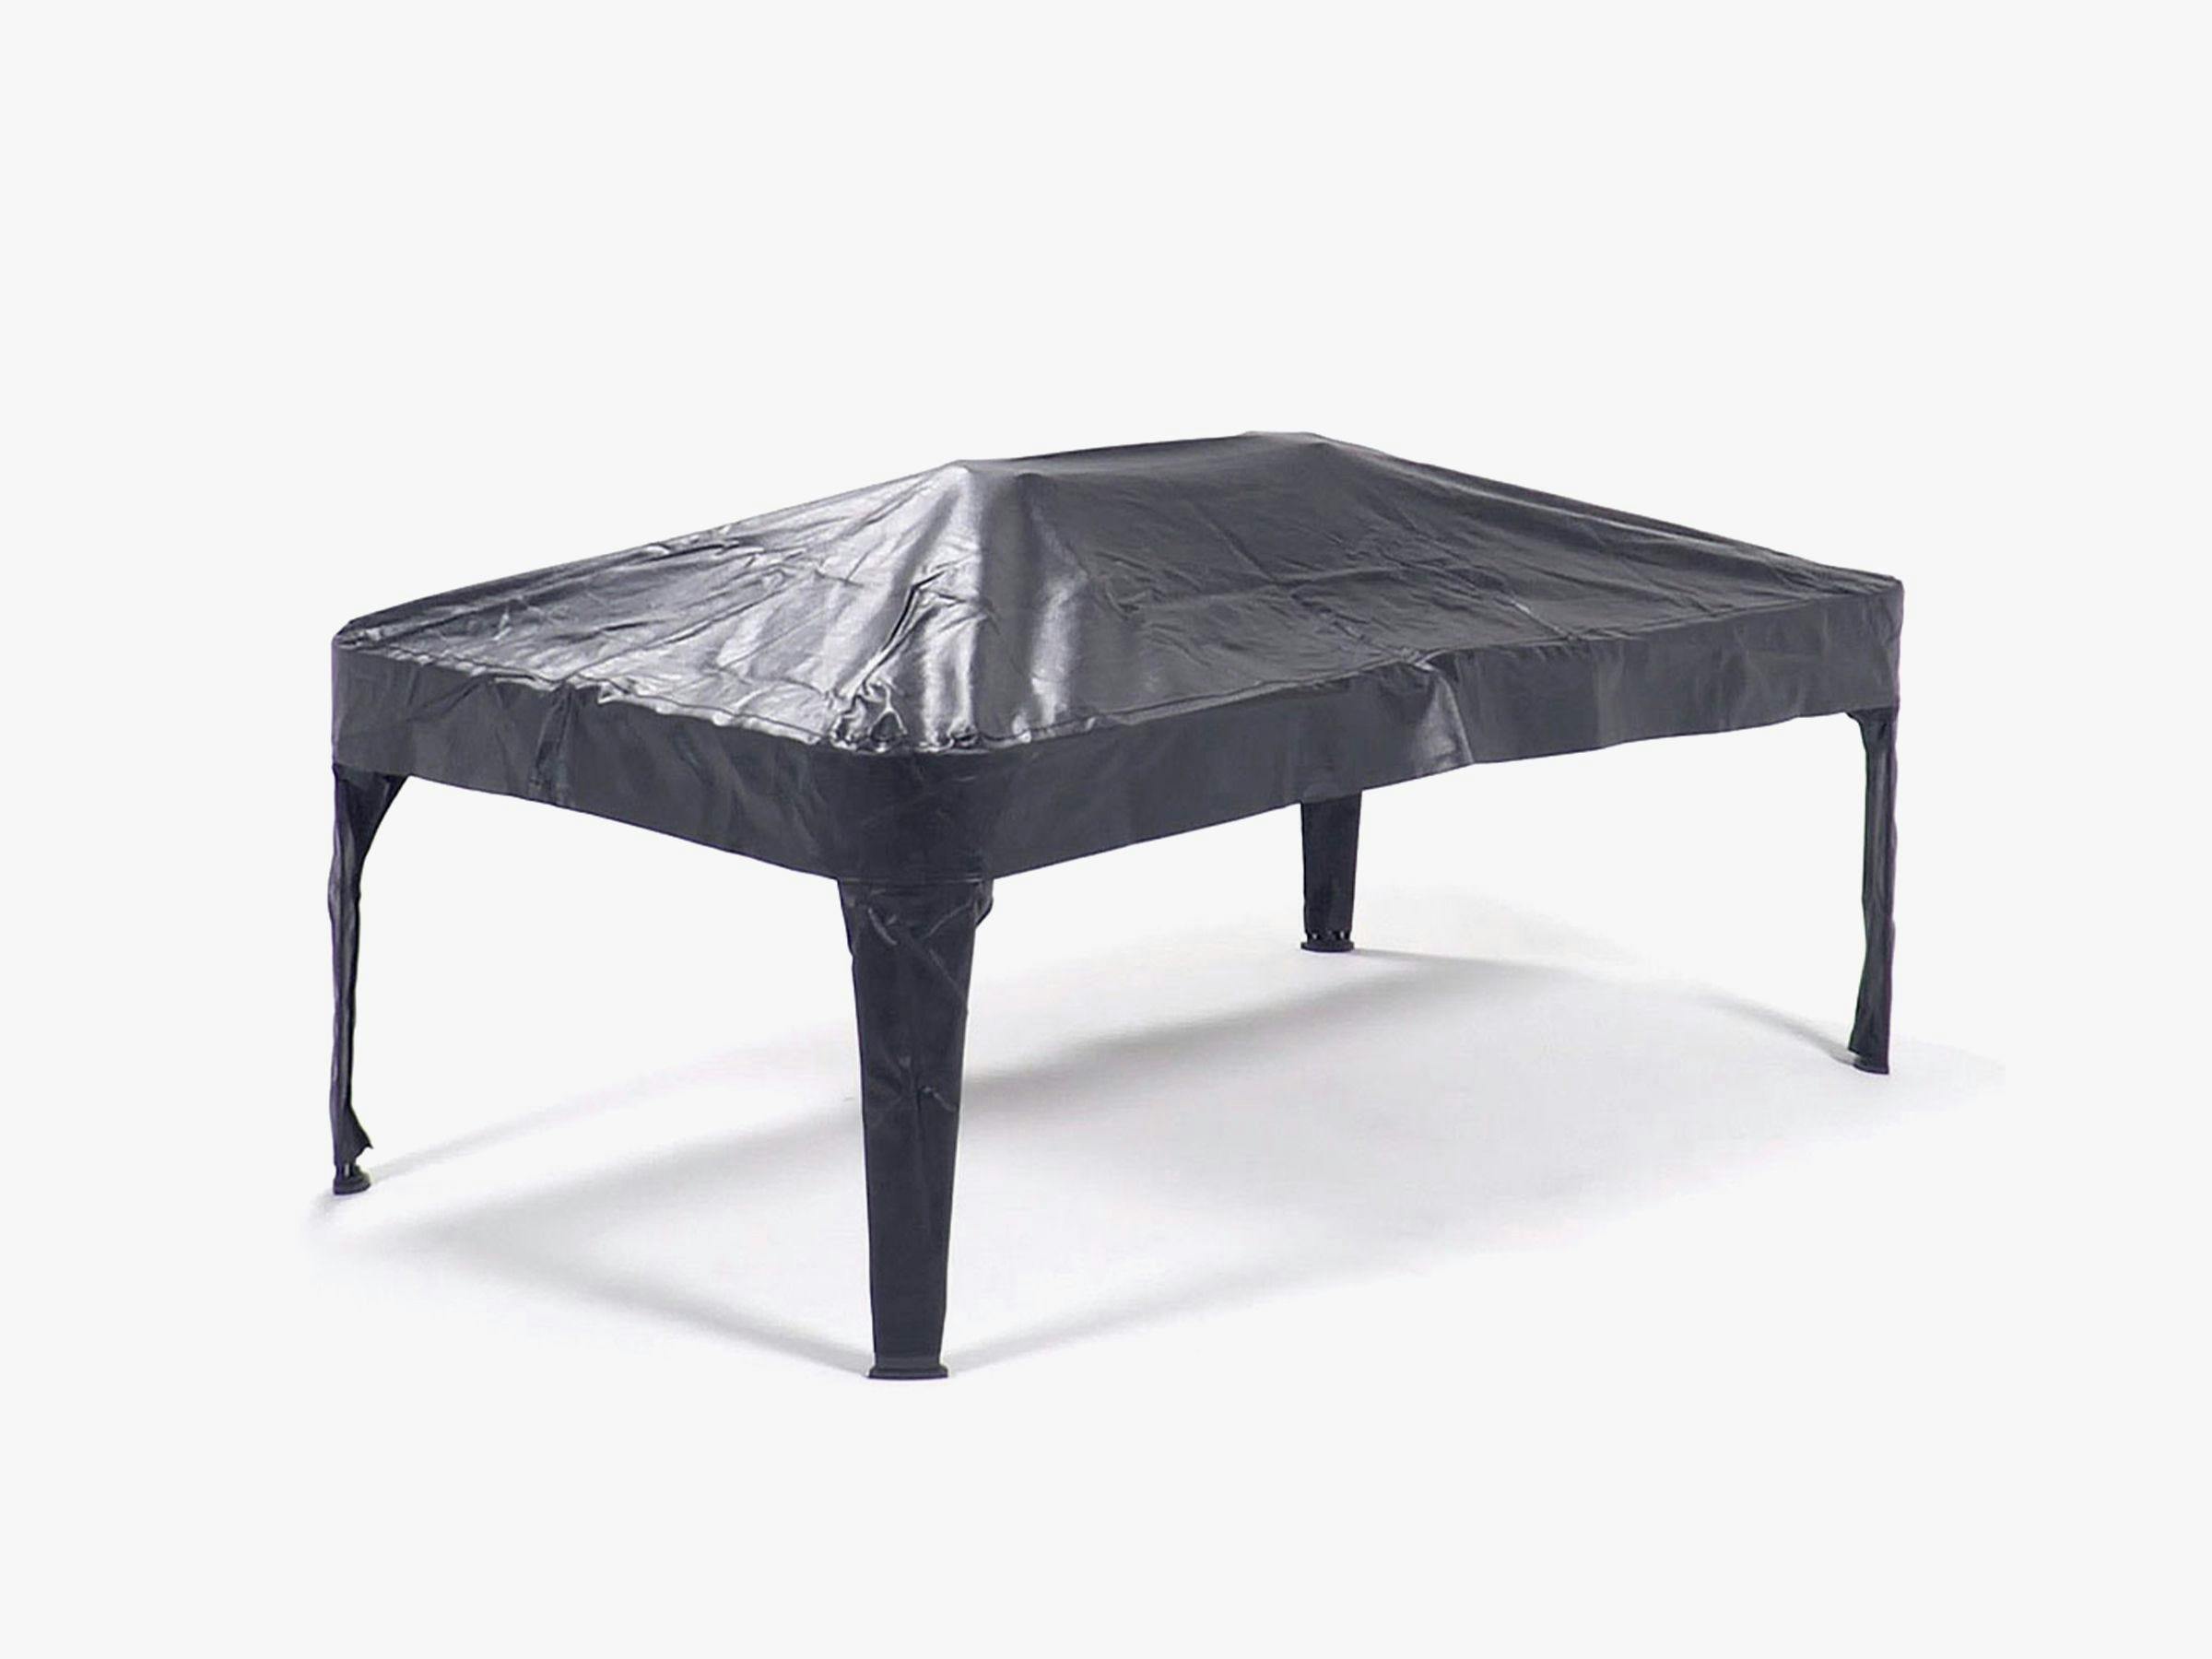 Hyphen Pool Table Cover, optional